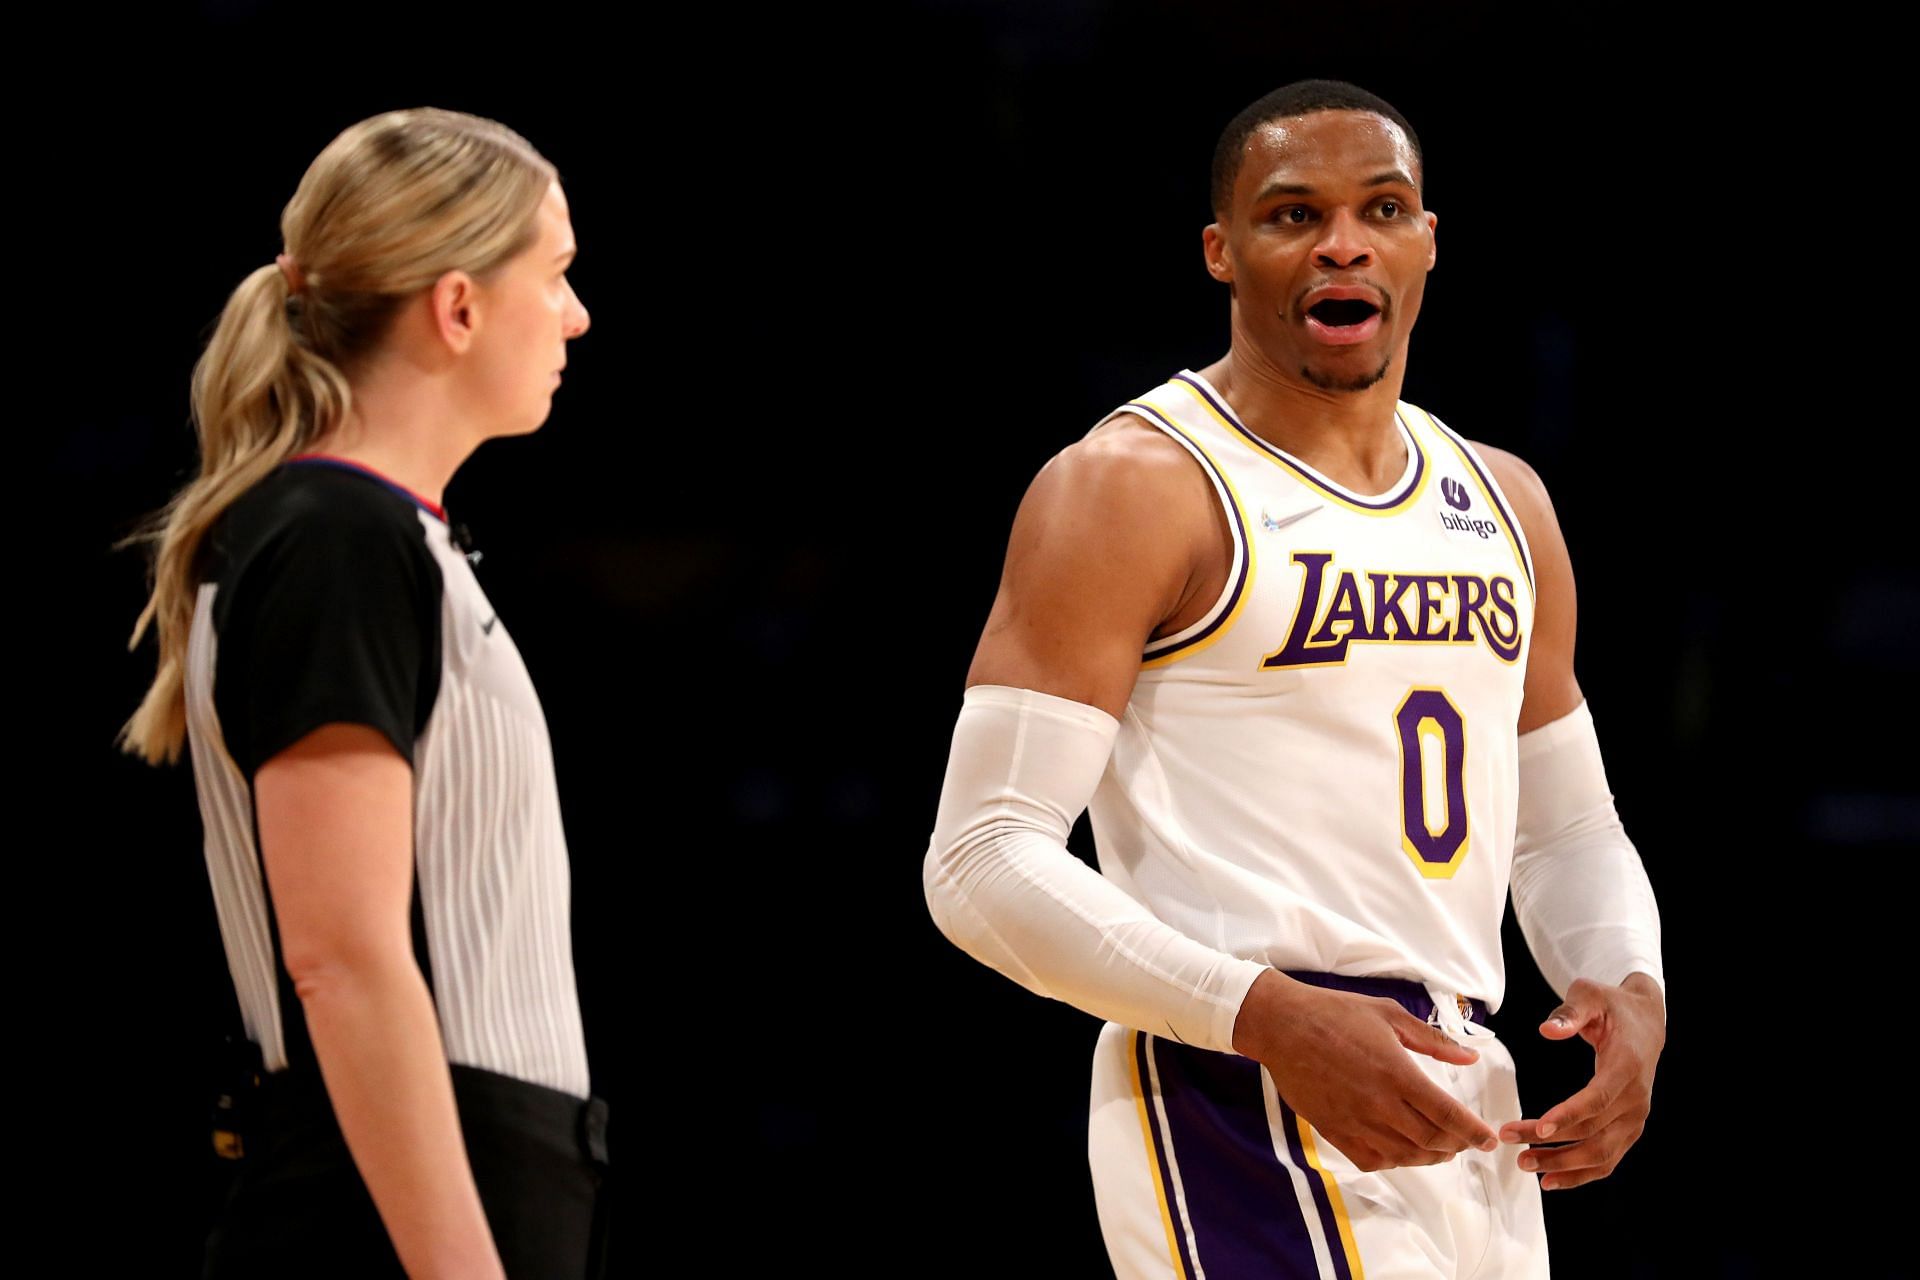 Russell Westbrook of the LA Lakers talks with an official.